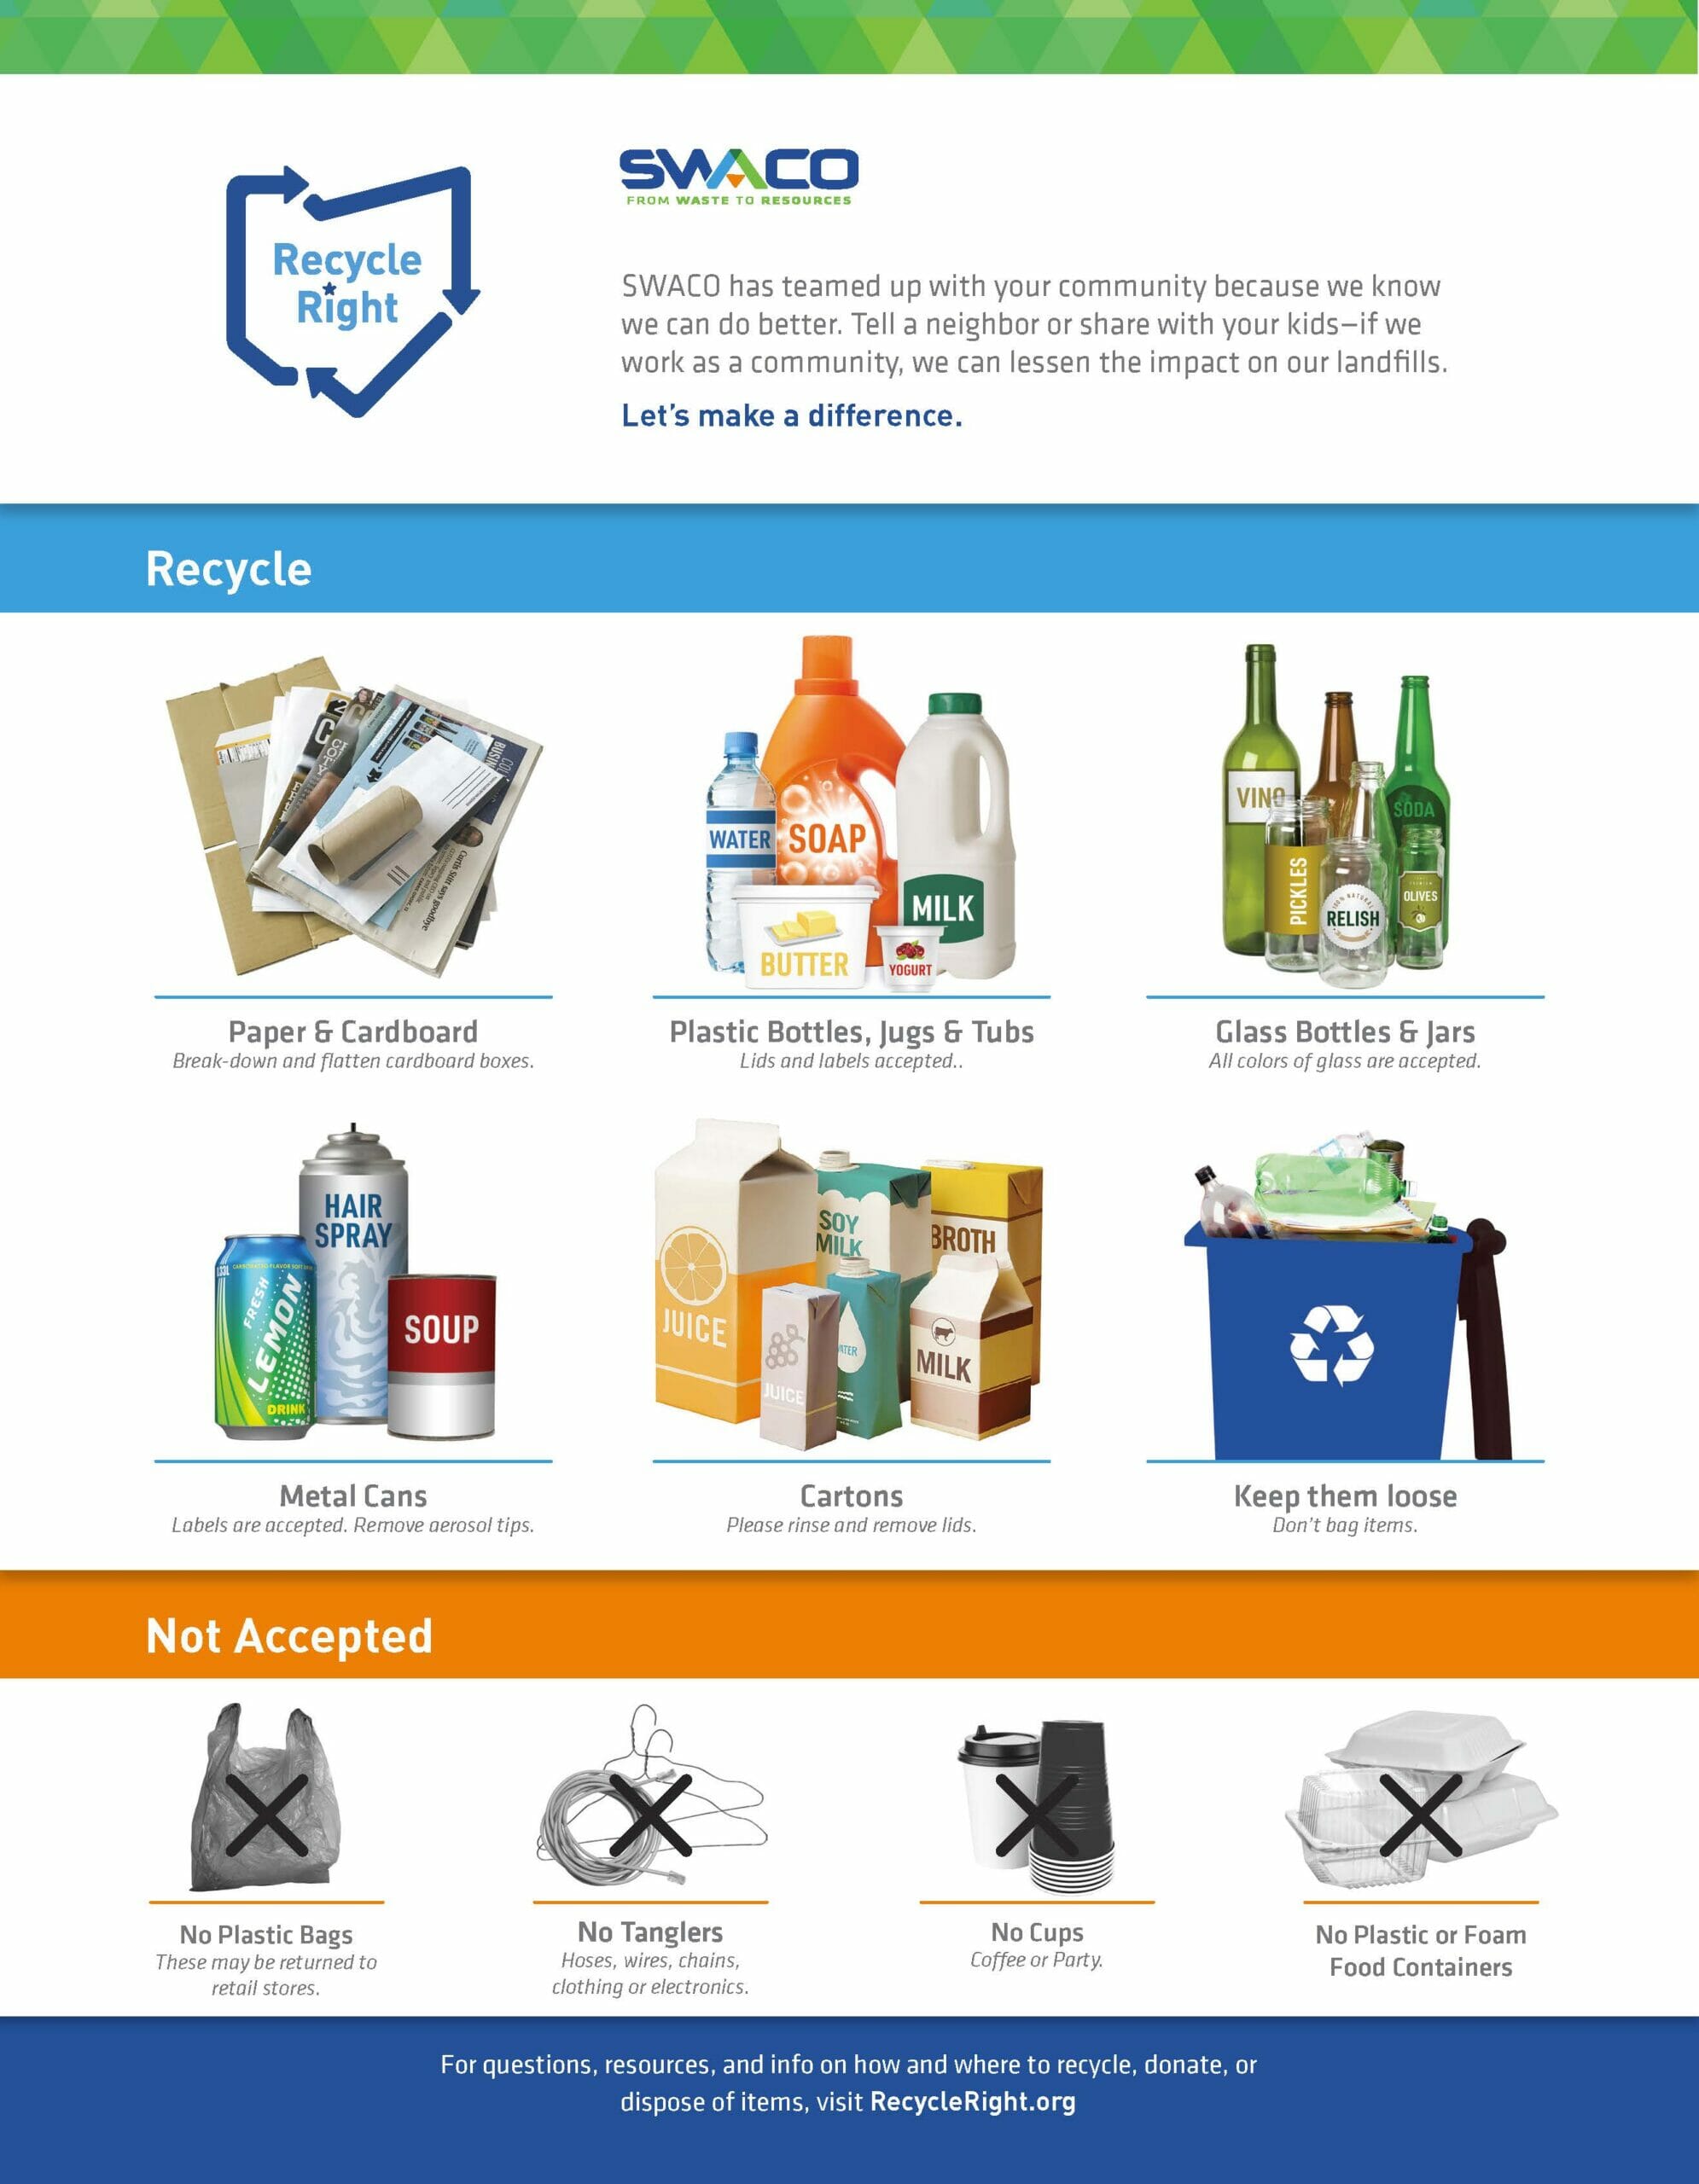 The City of Hilliard wants to make proper recycling as easy as possible for you so we provide each resident with containers to place acceptable items.